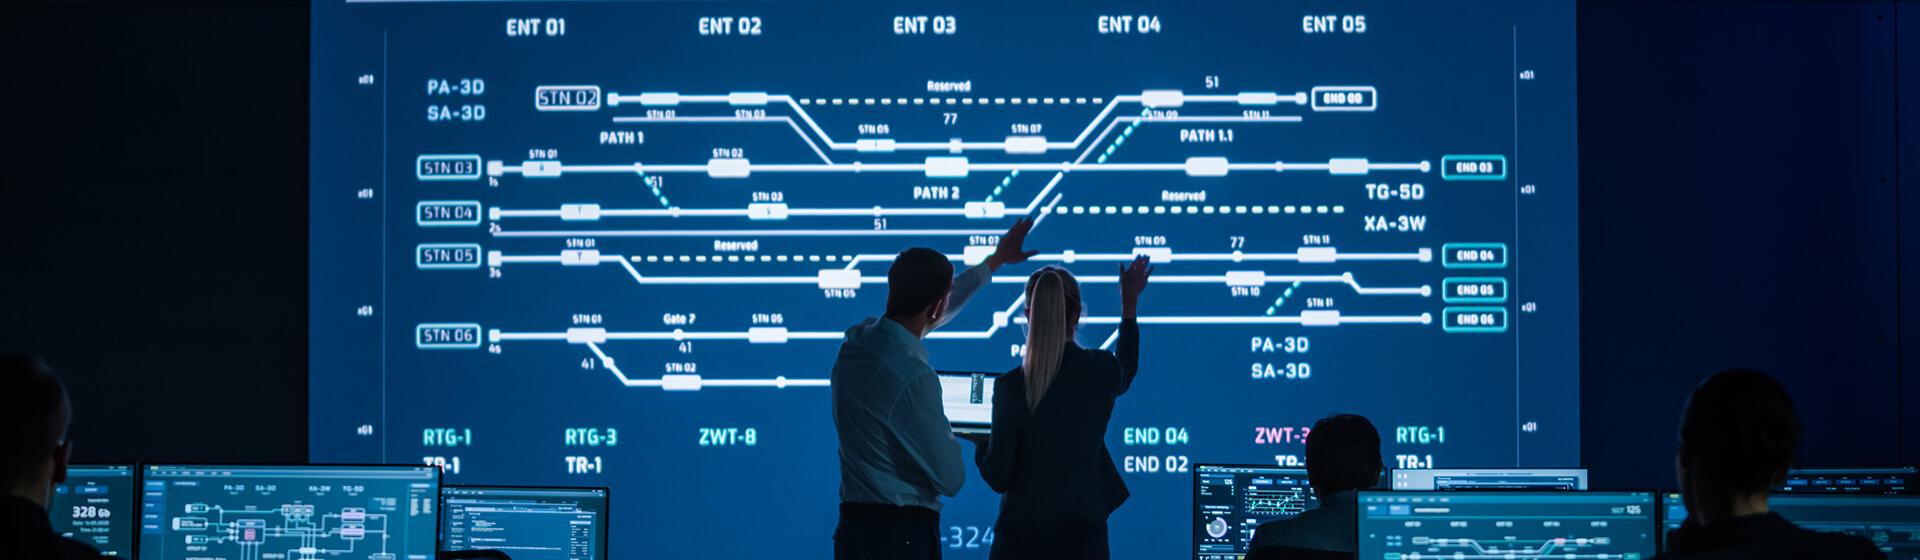 a professional man and woman in a control room interacting with a large monitoring screen showing rail routes at a maritime shipping terminal.